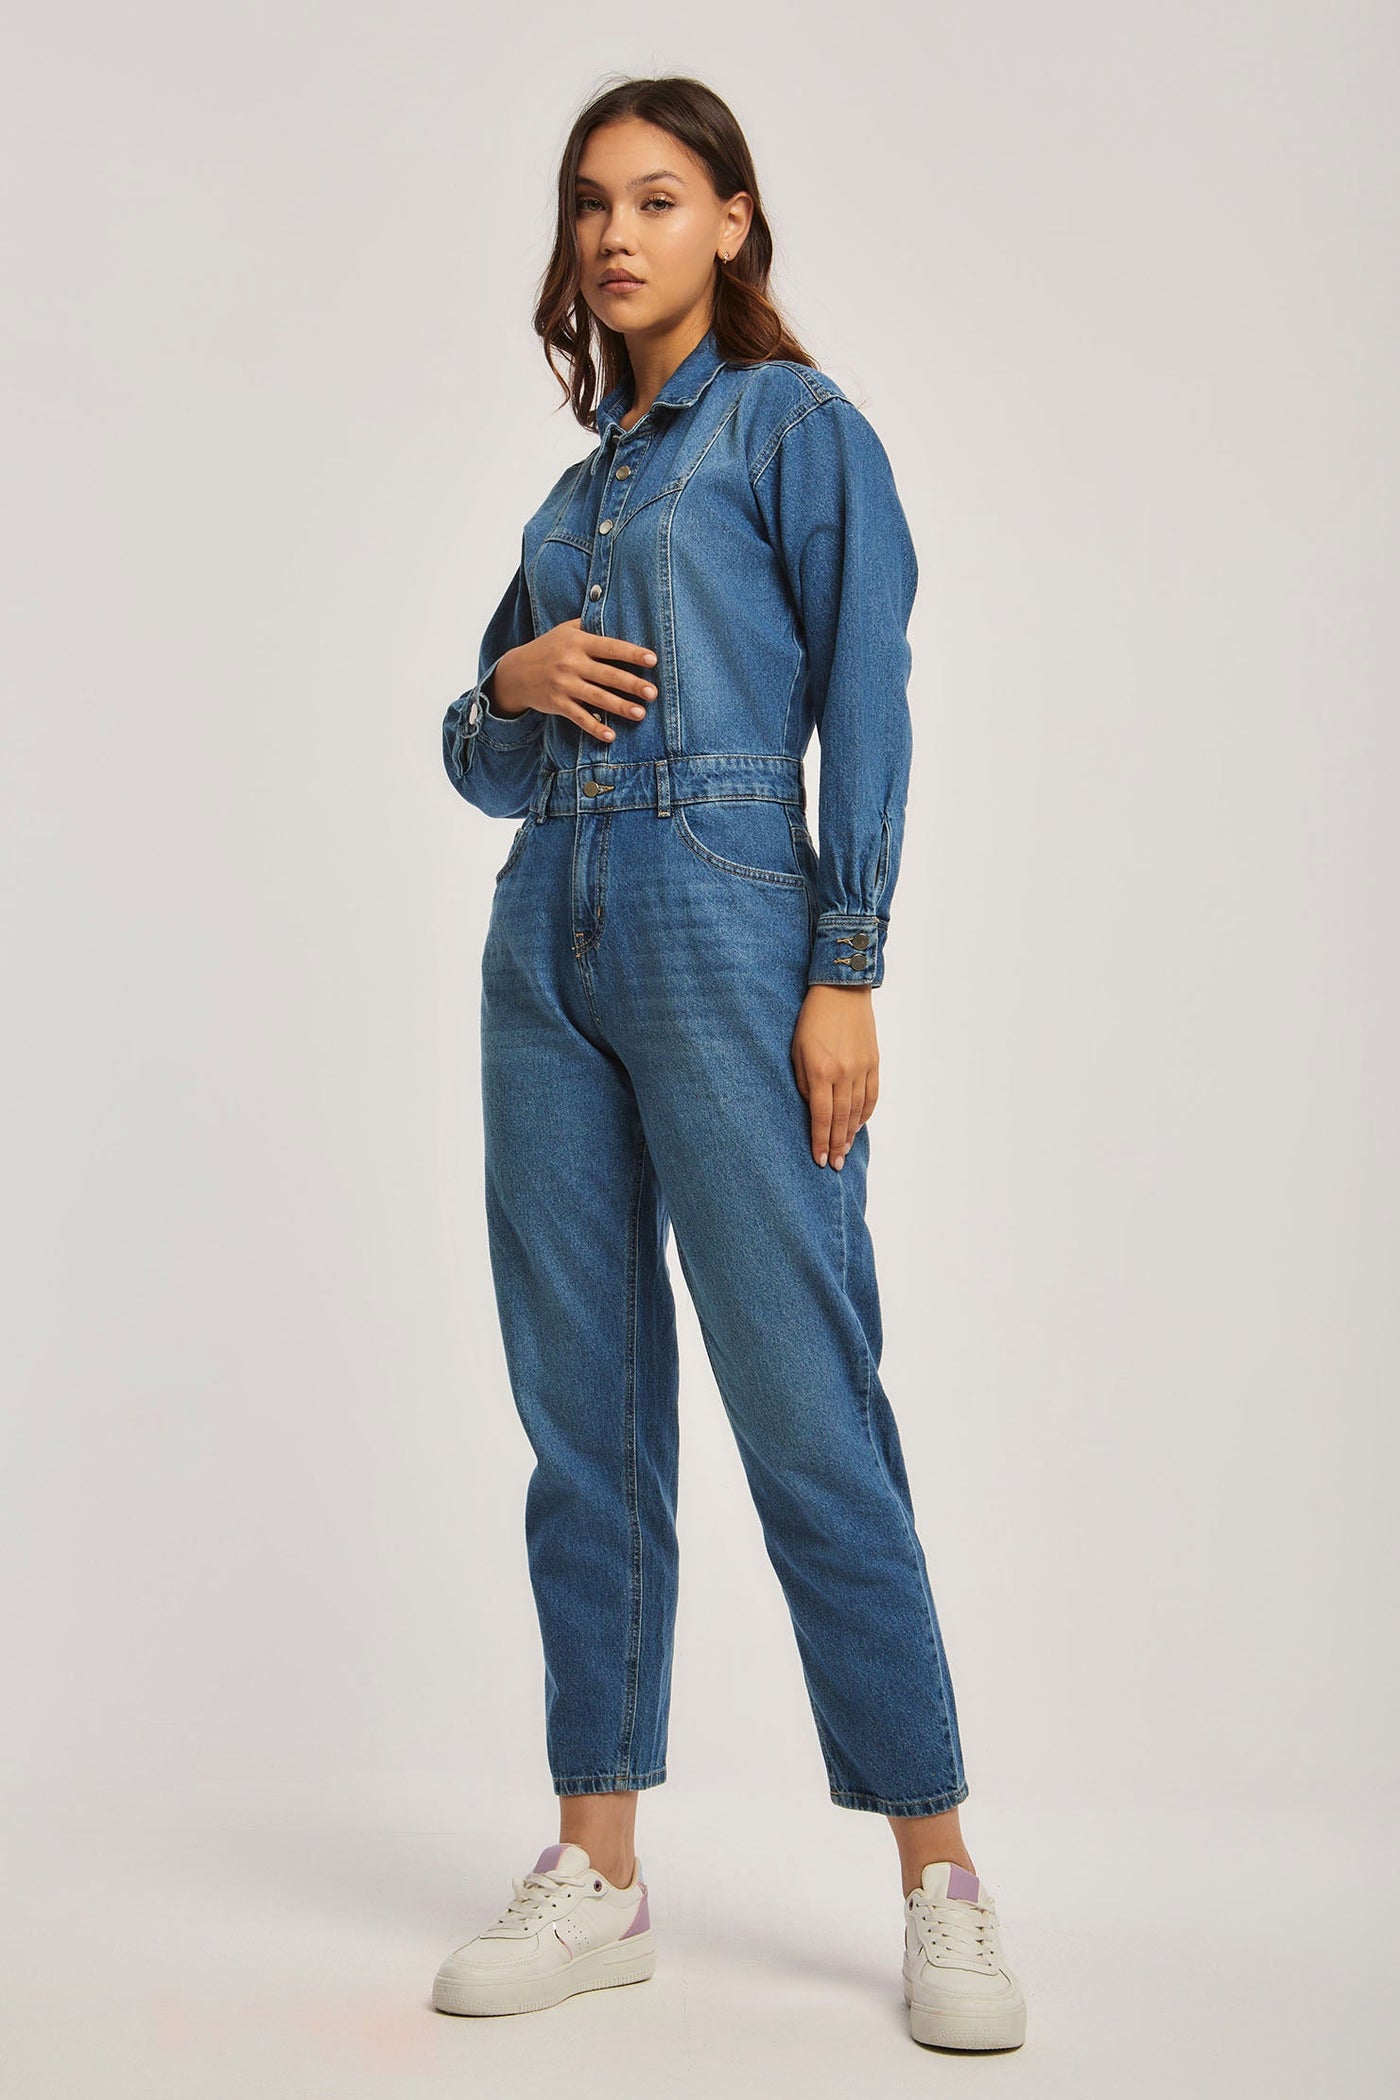 Denim Jumpsuit - Long Sleeves - With Pockets